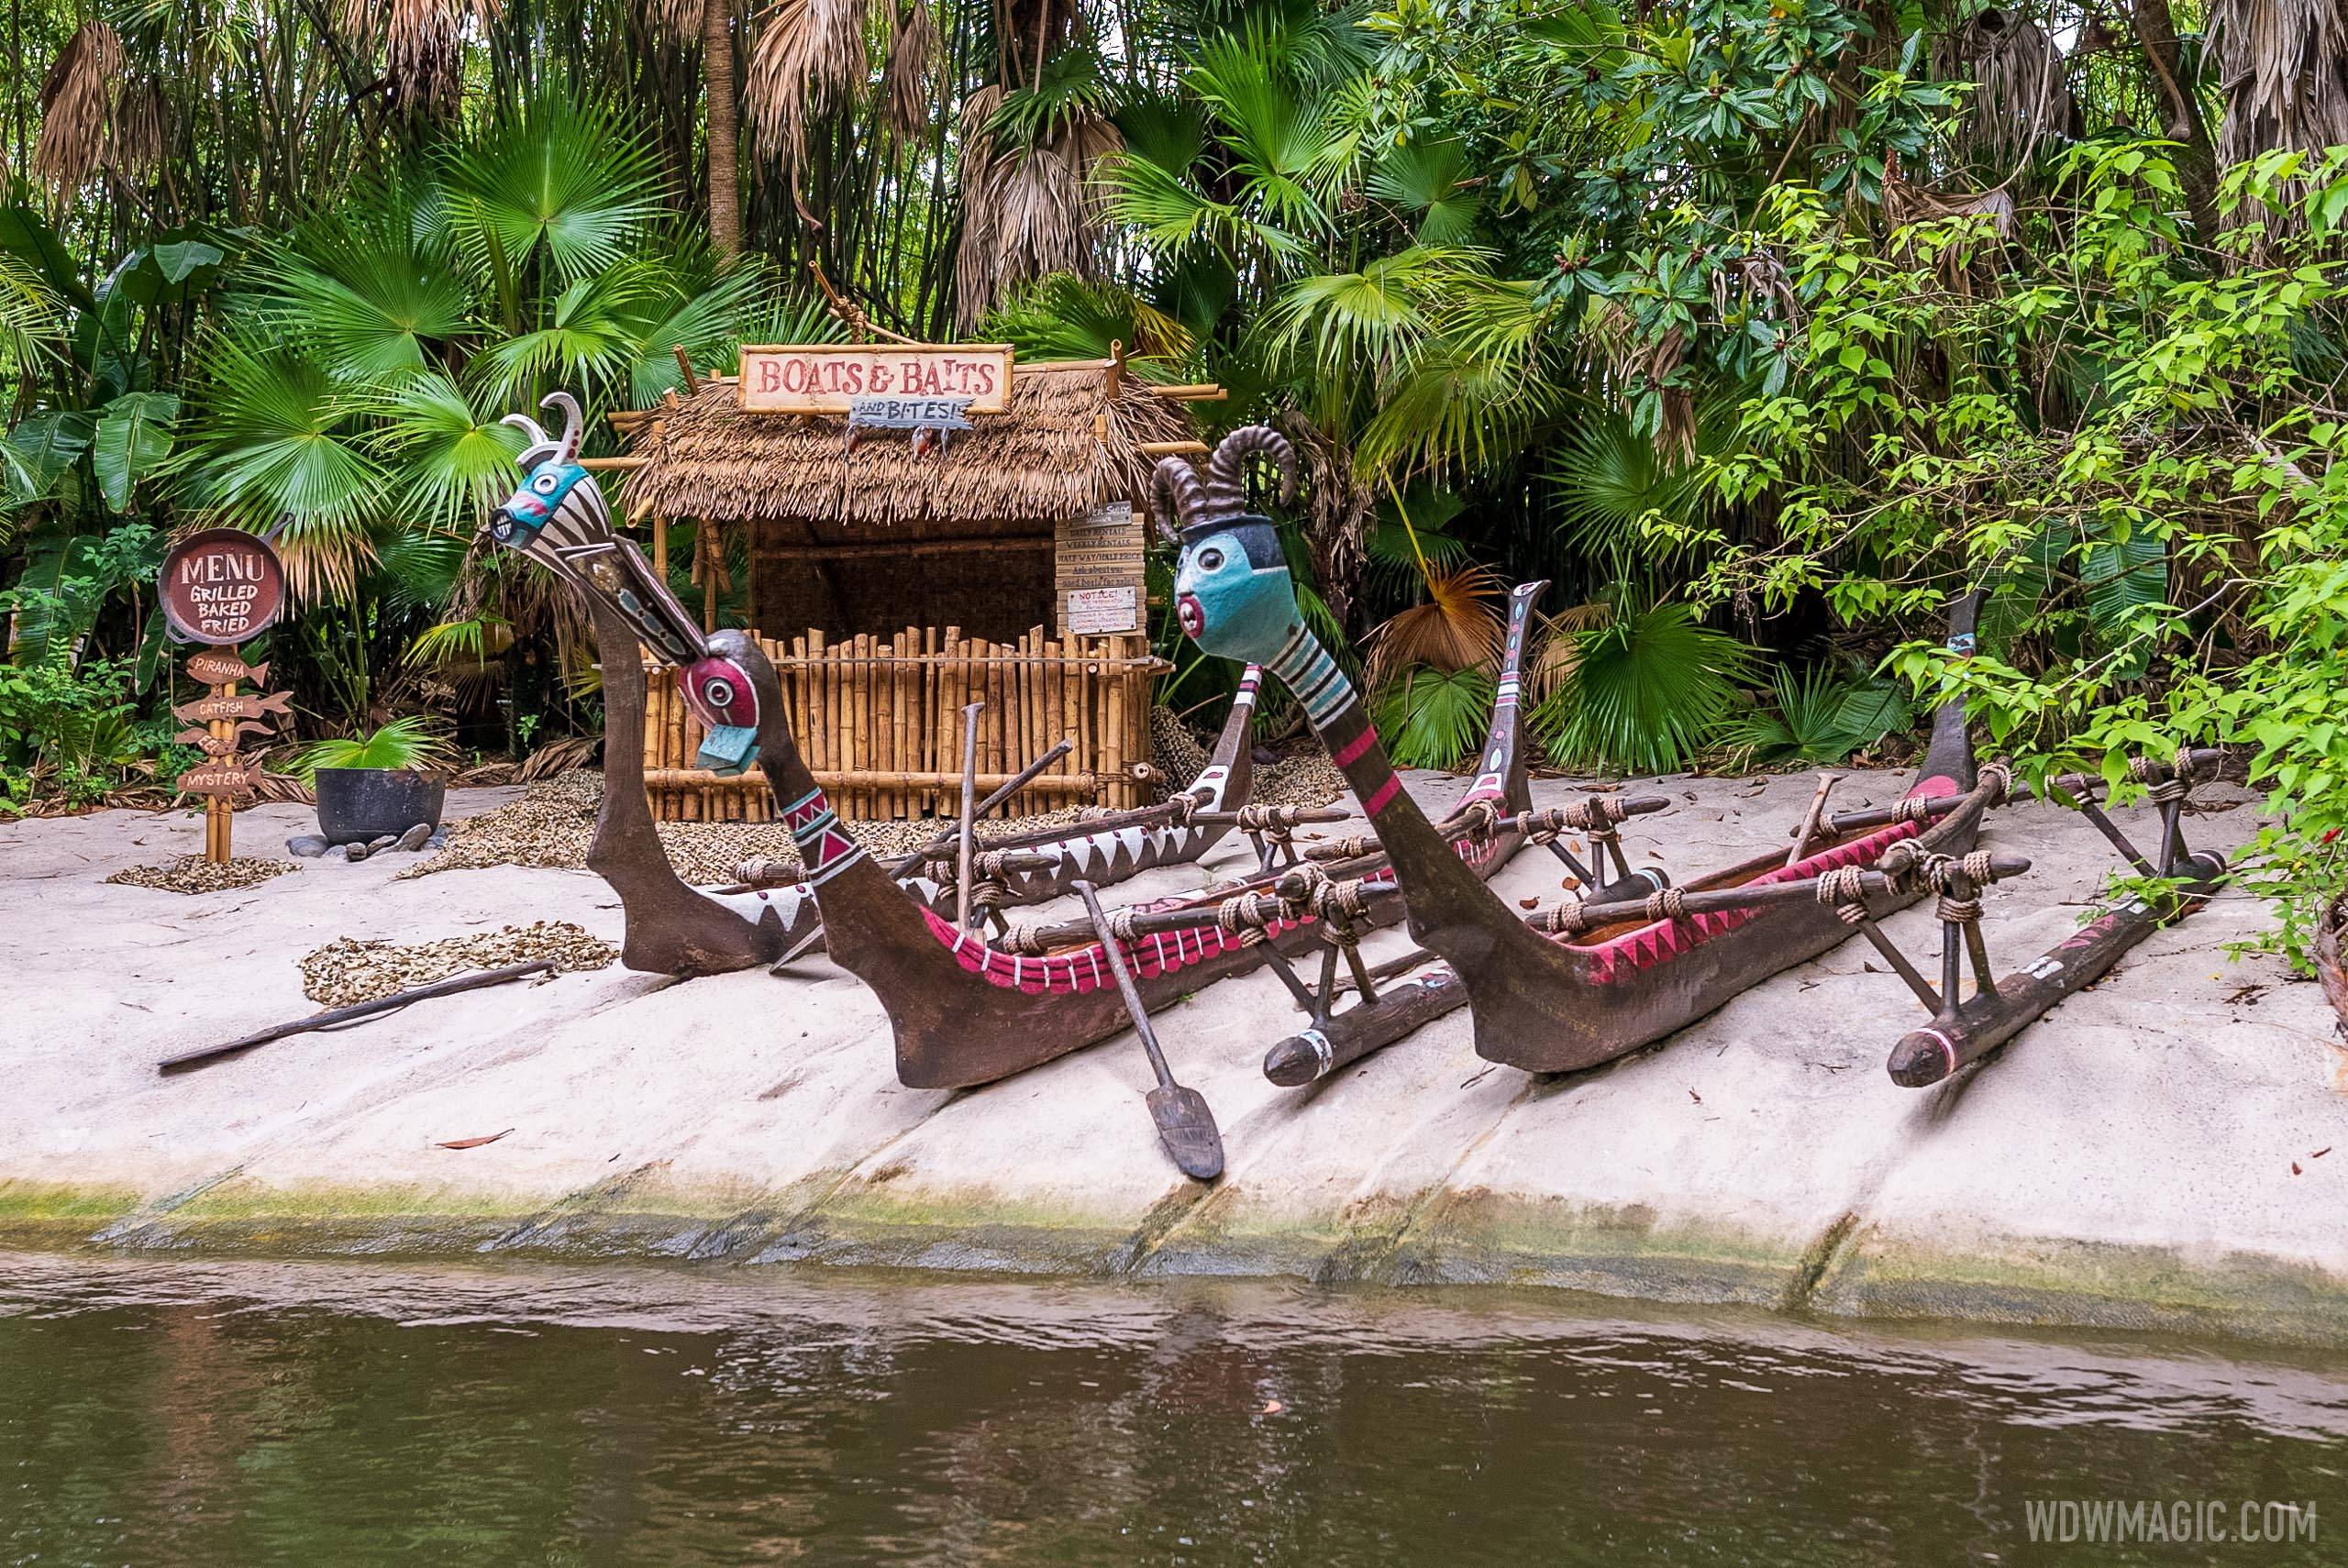 Third new scene installed at the Jungle Cruise - 'Boats and Baits - AND BITES'